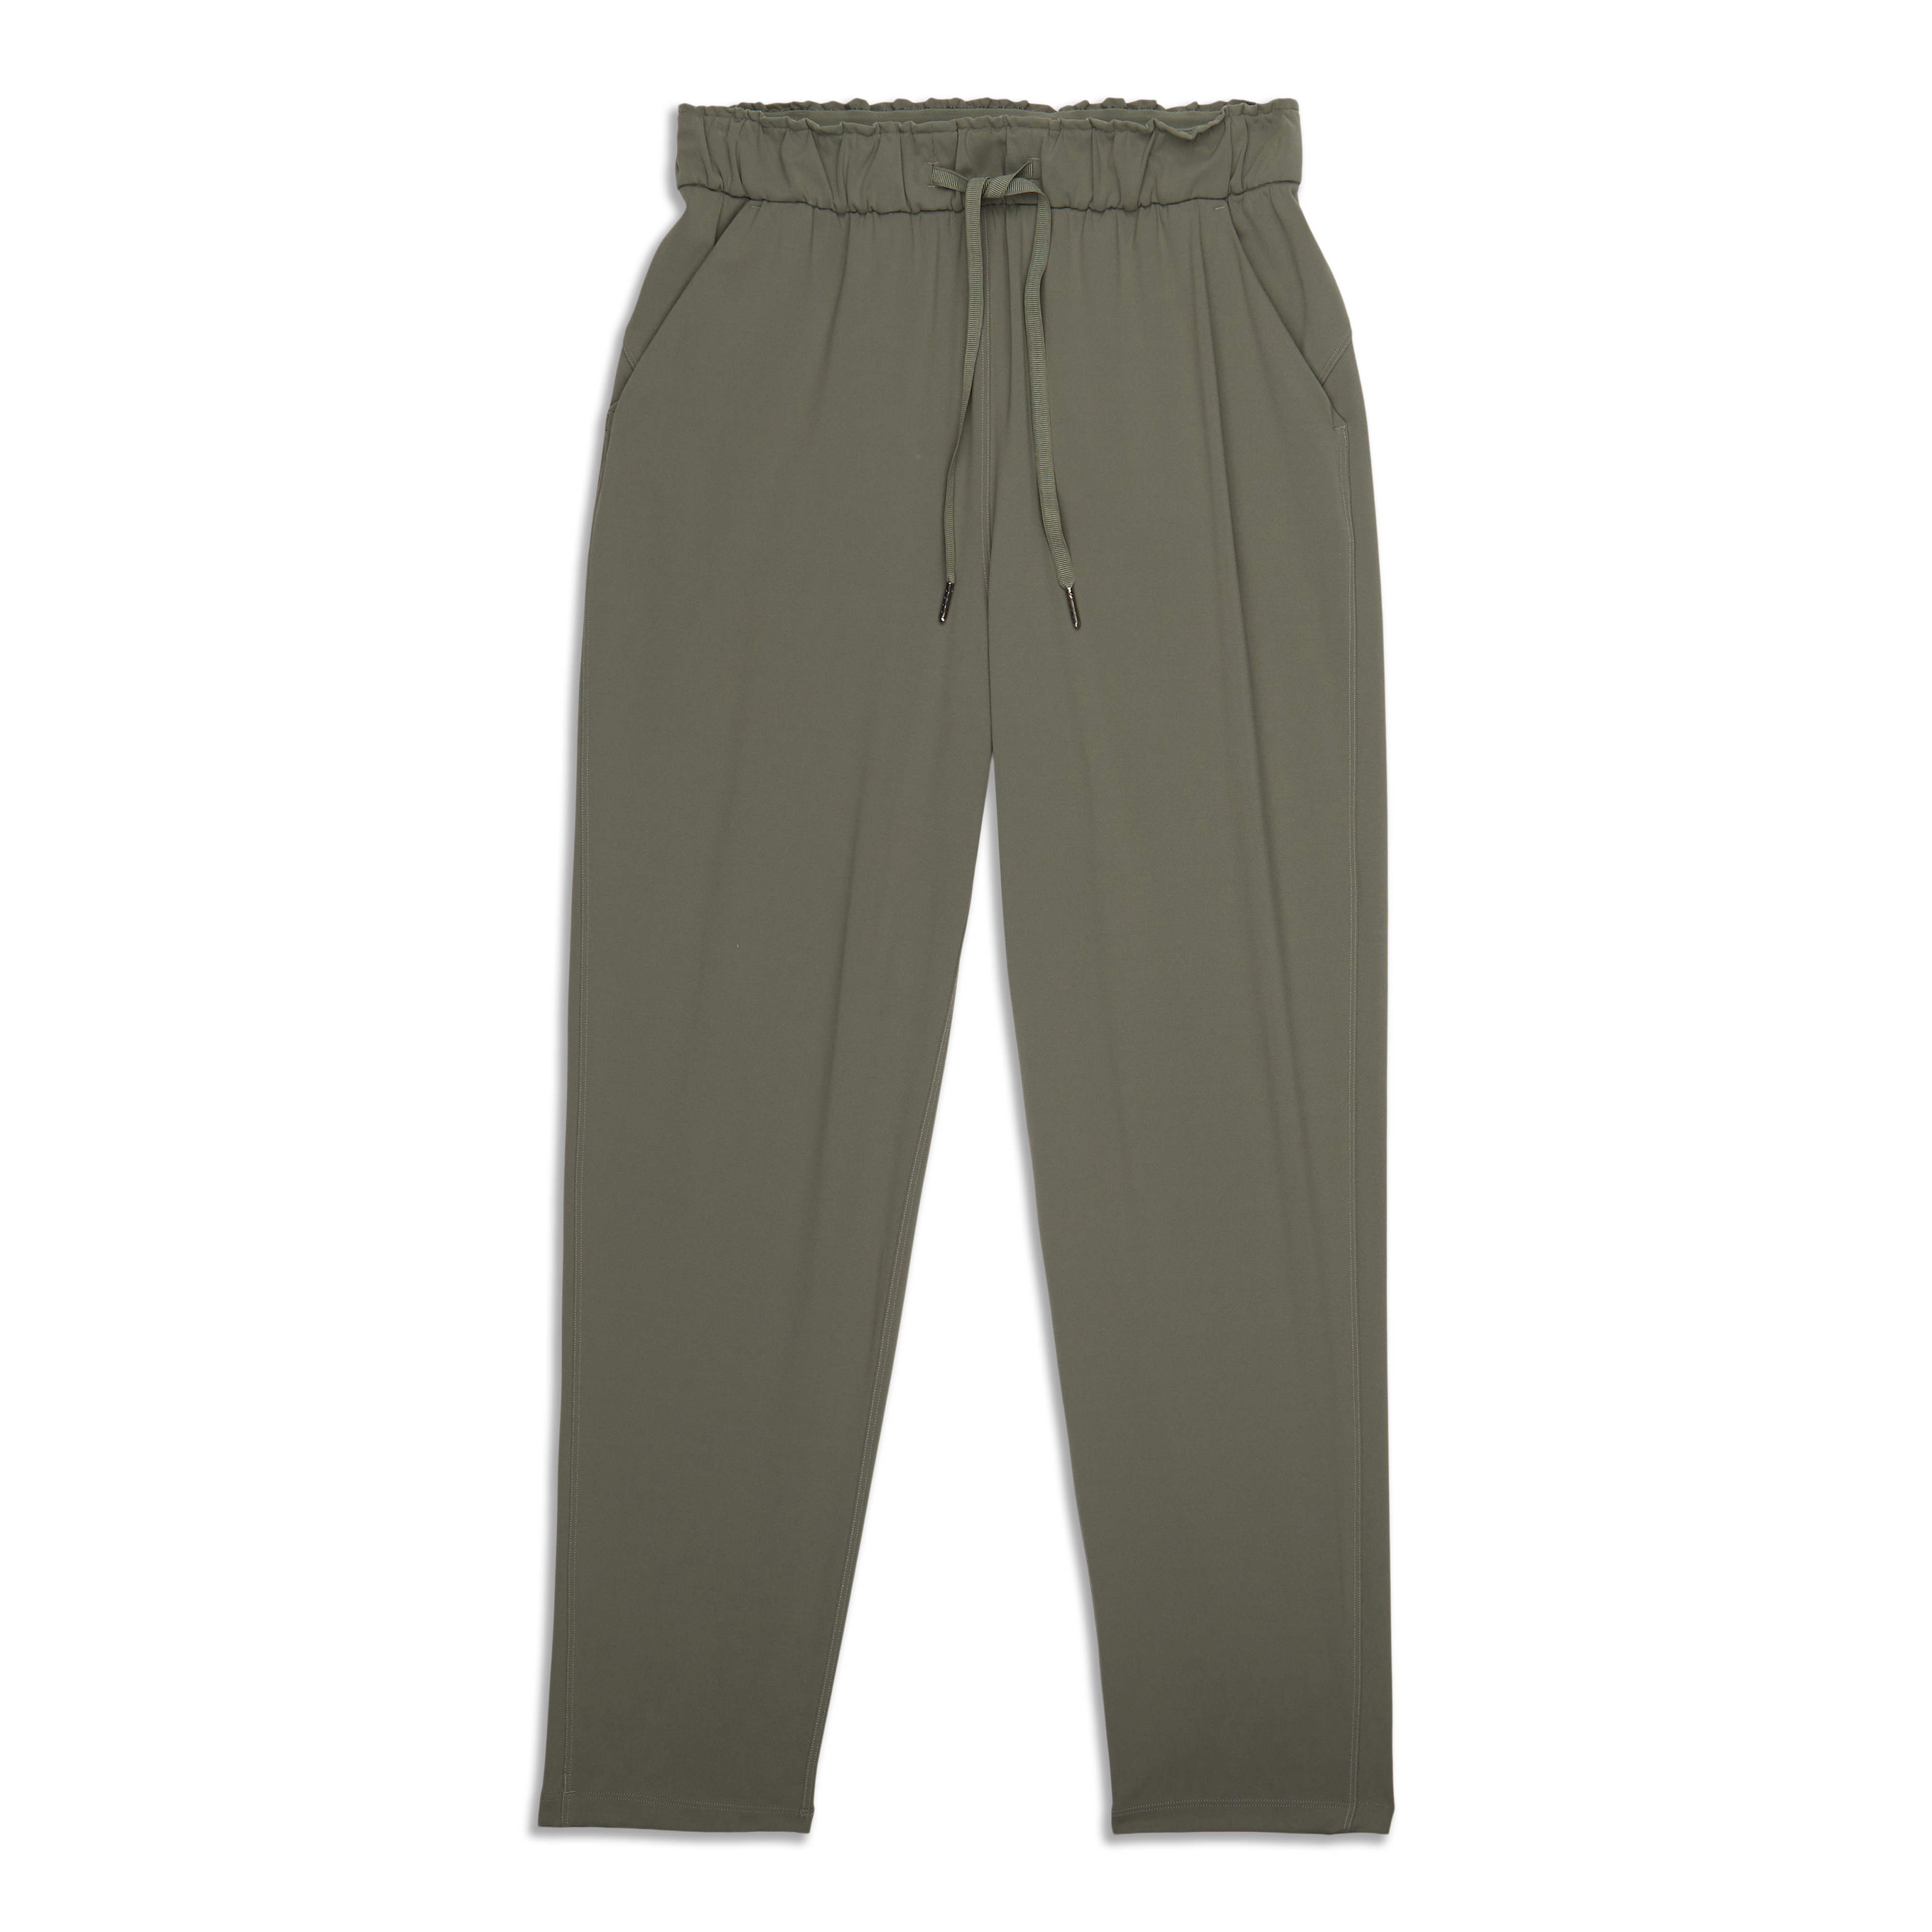 Lululemon Keep Moving Pant 7/8 High-Rise Graphite Grey Sz 4 Gray - $59 -  From Jessi